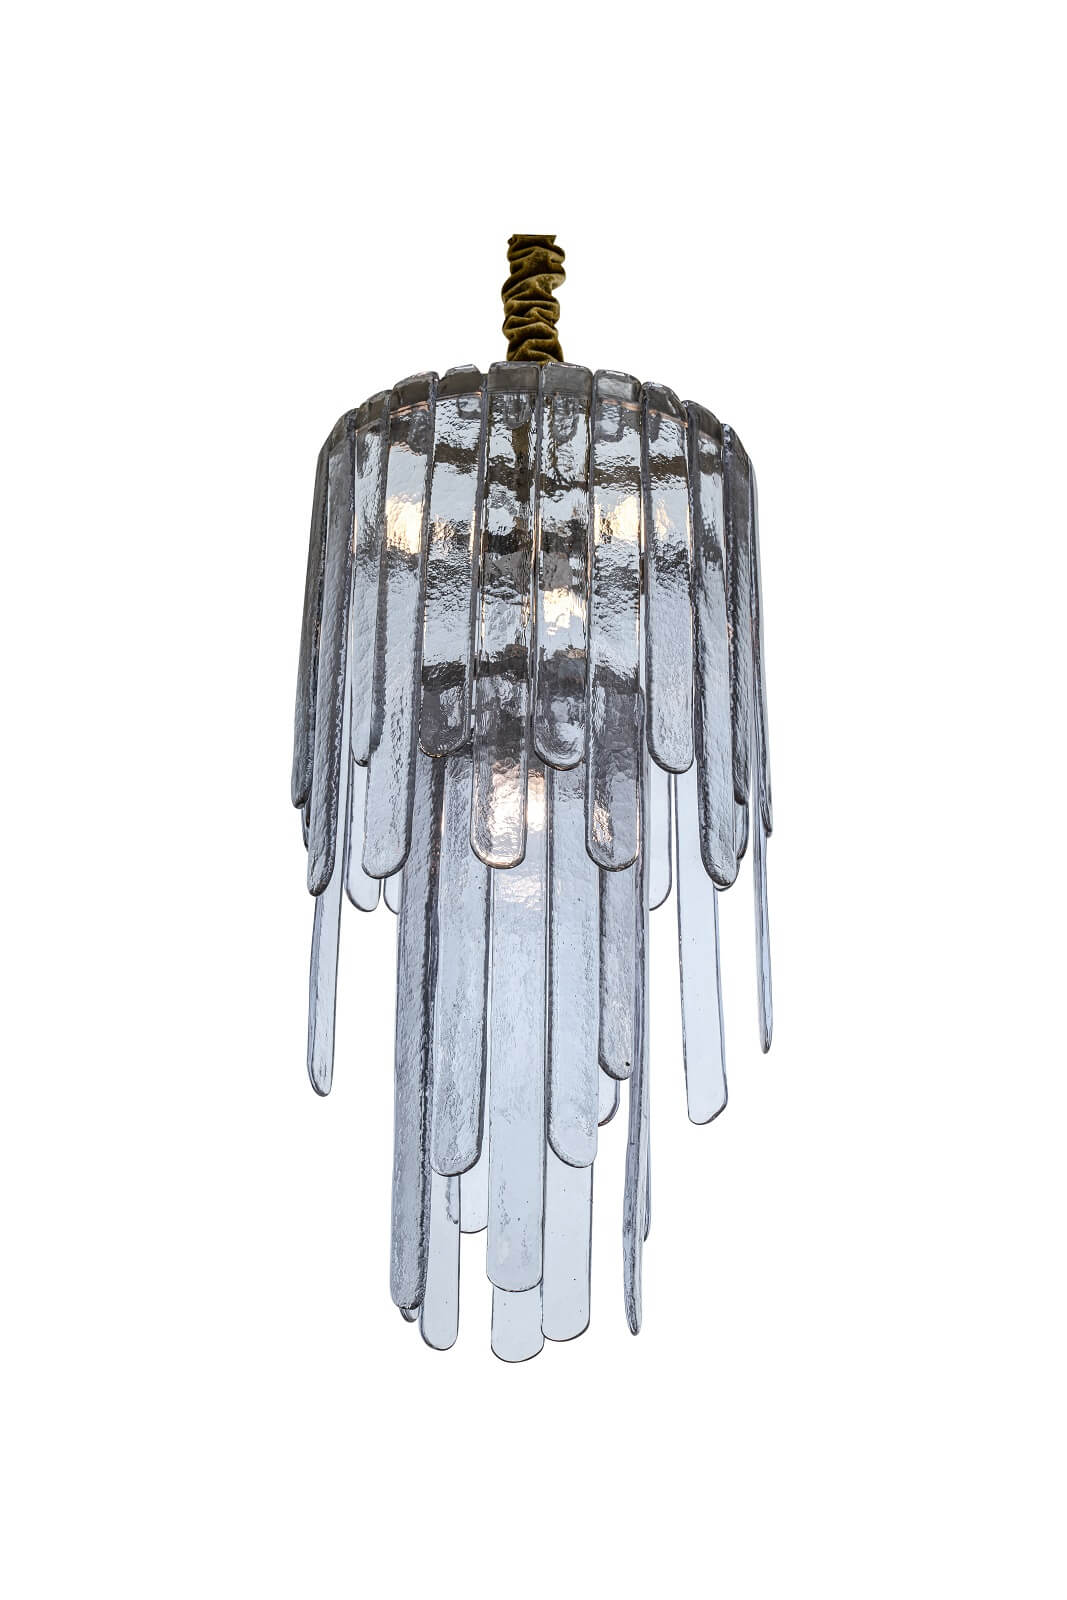 Ceiling lamp Cascade by Carlo Nason for sale